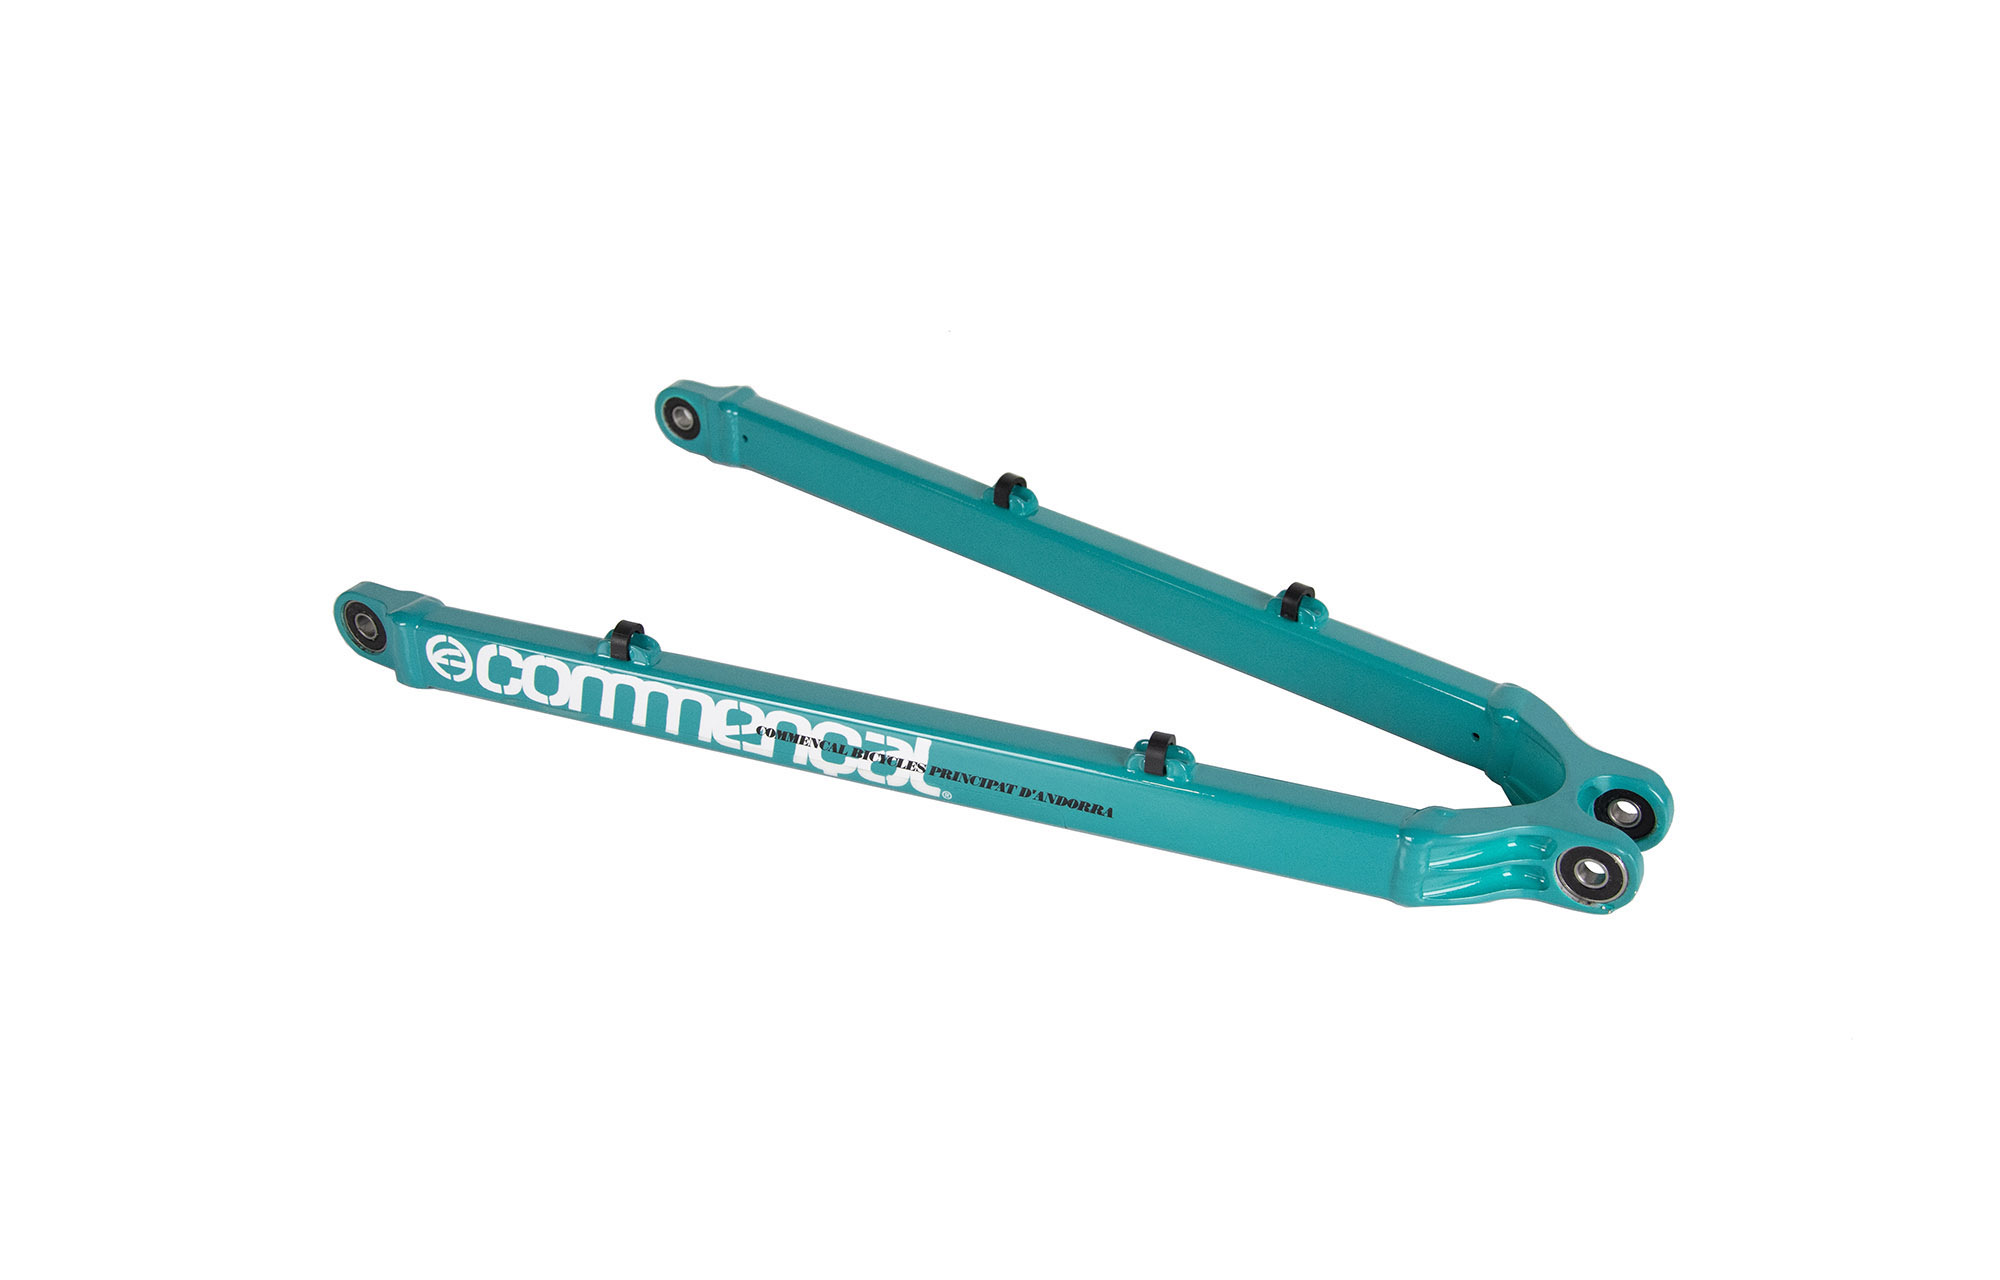 BLUE SEATSTAYS, 150 mm rear wheel axle, for FURIOUS CG 2010 image number null